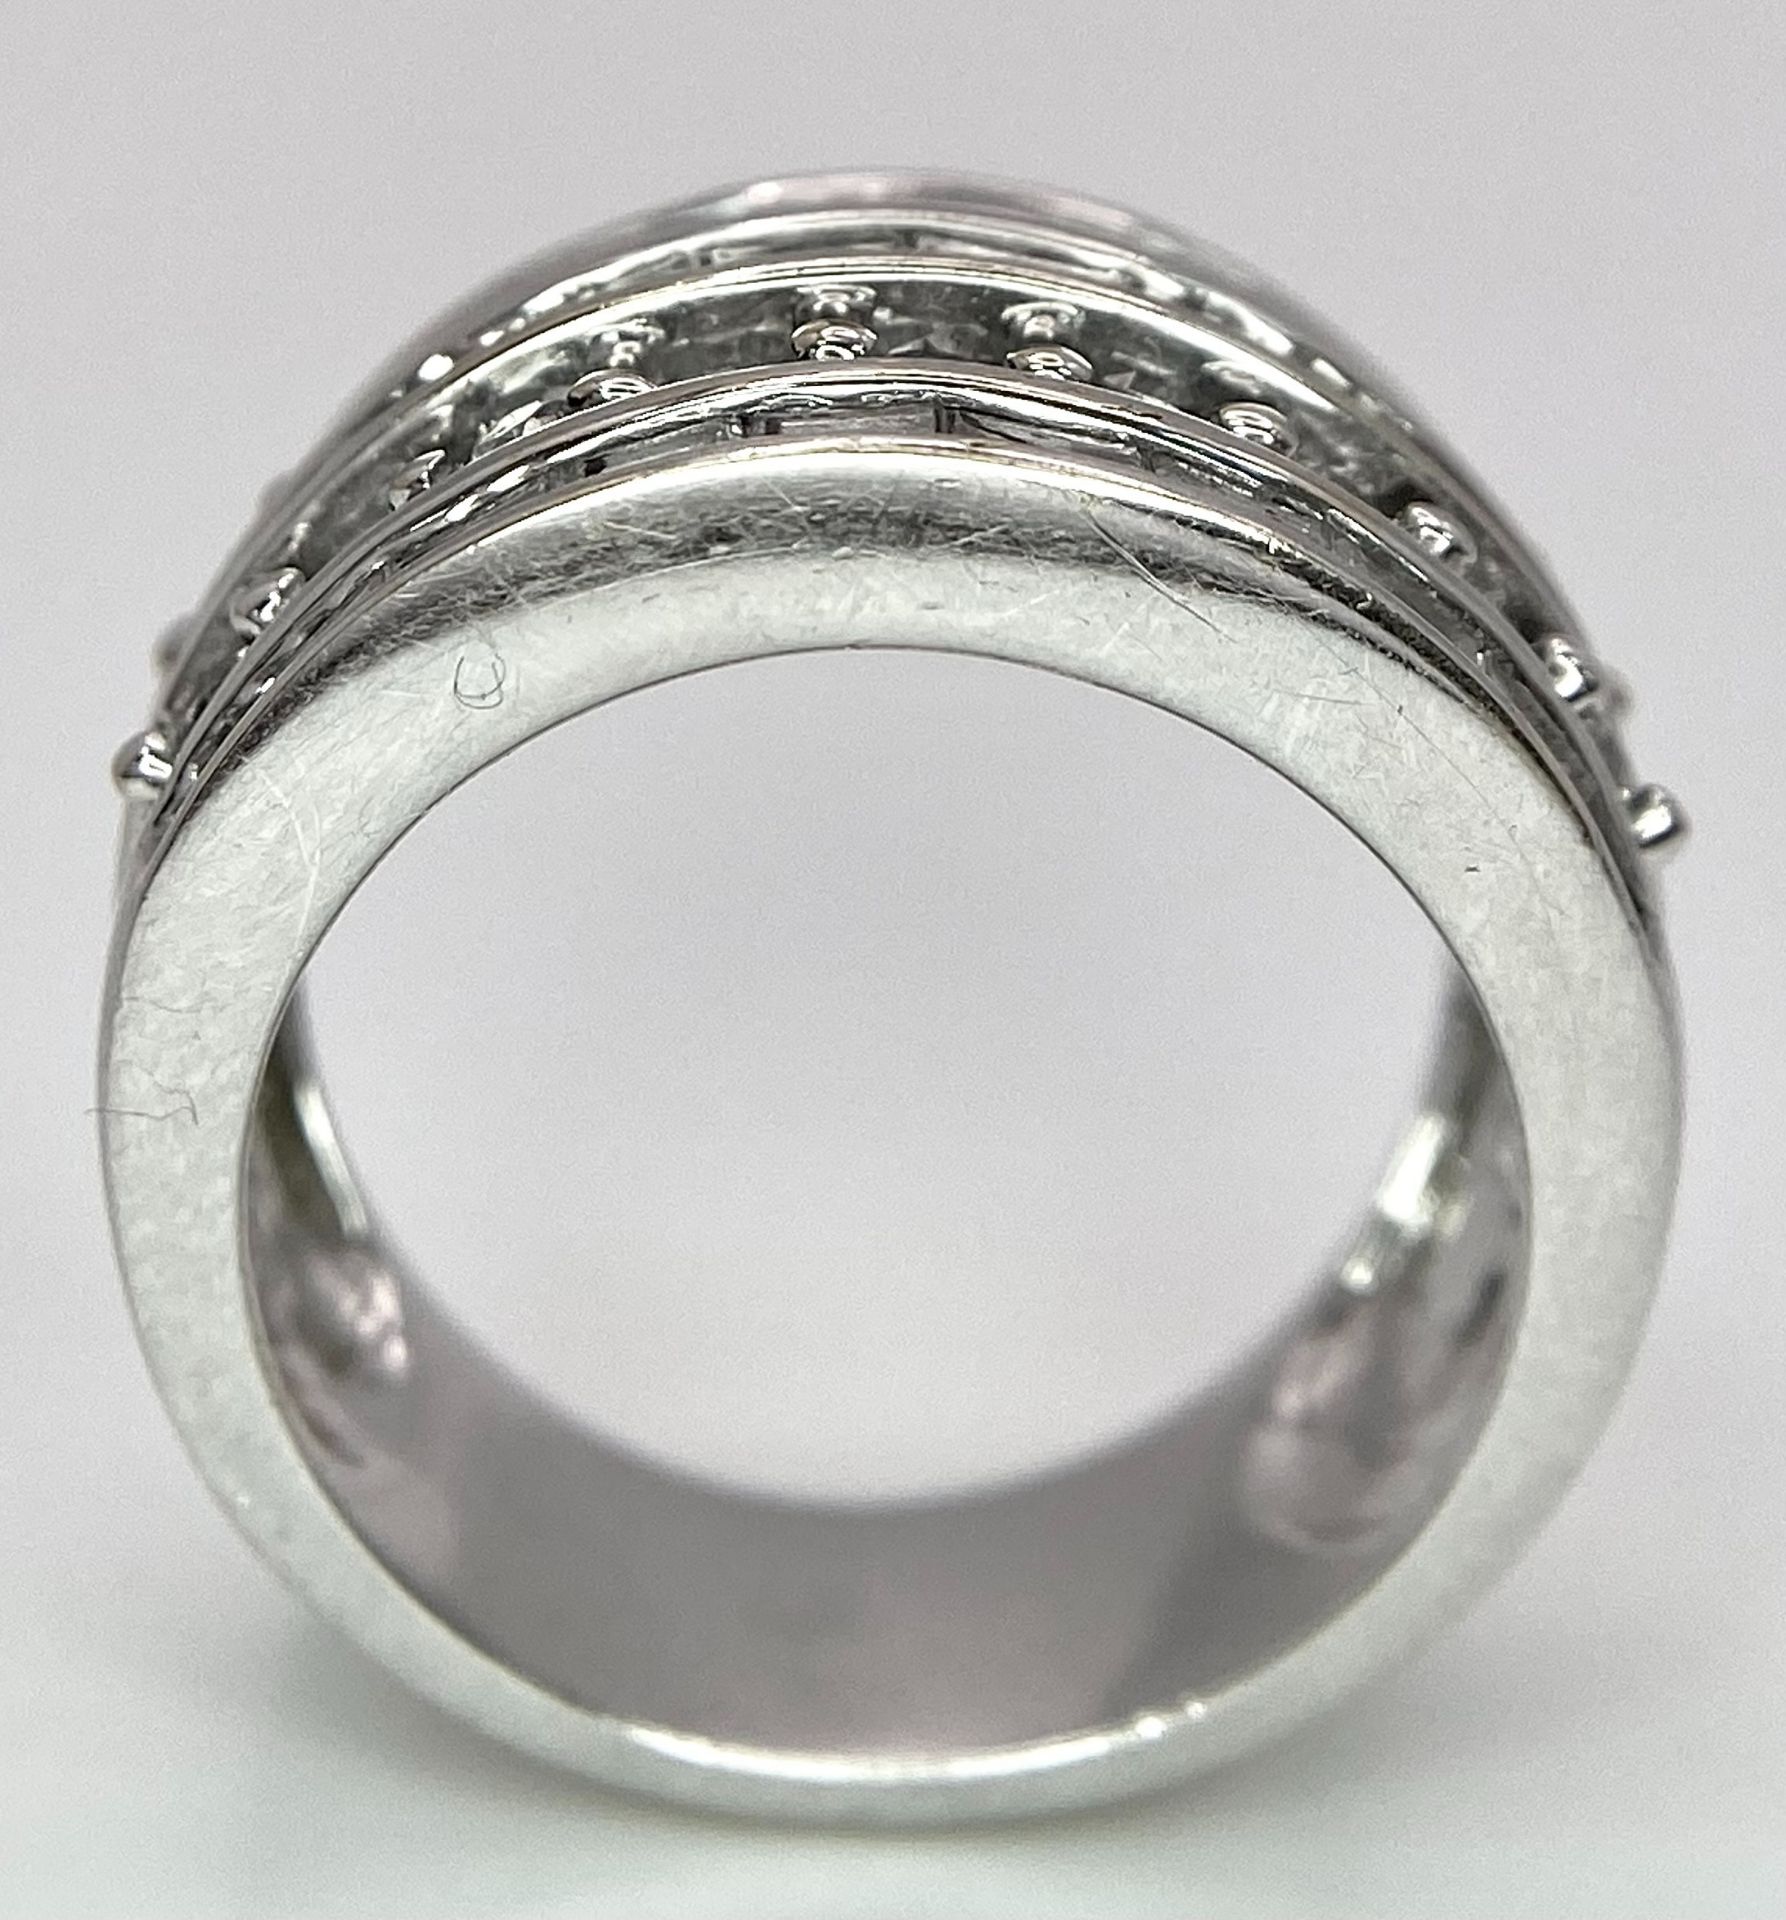 AN 18K WHITE GOLD 5 ROW DIAMOND RING. MIXTURE OF ROUND BRILLIANT CUTS AND BAGUETTE CUT DIAMONDS. - Image 6 of 9